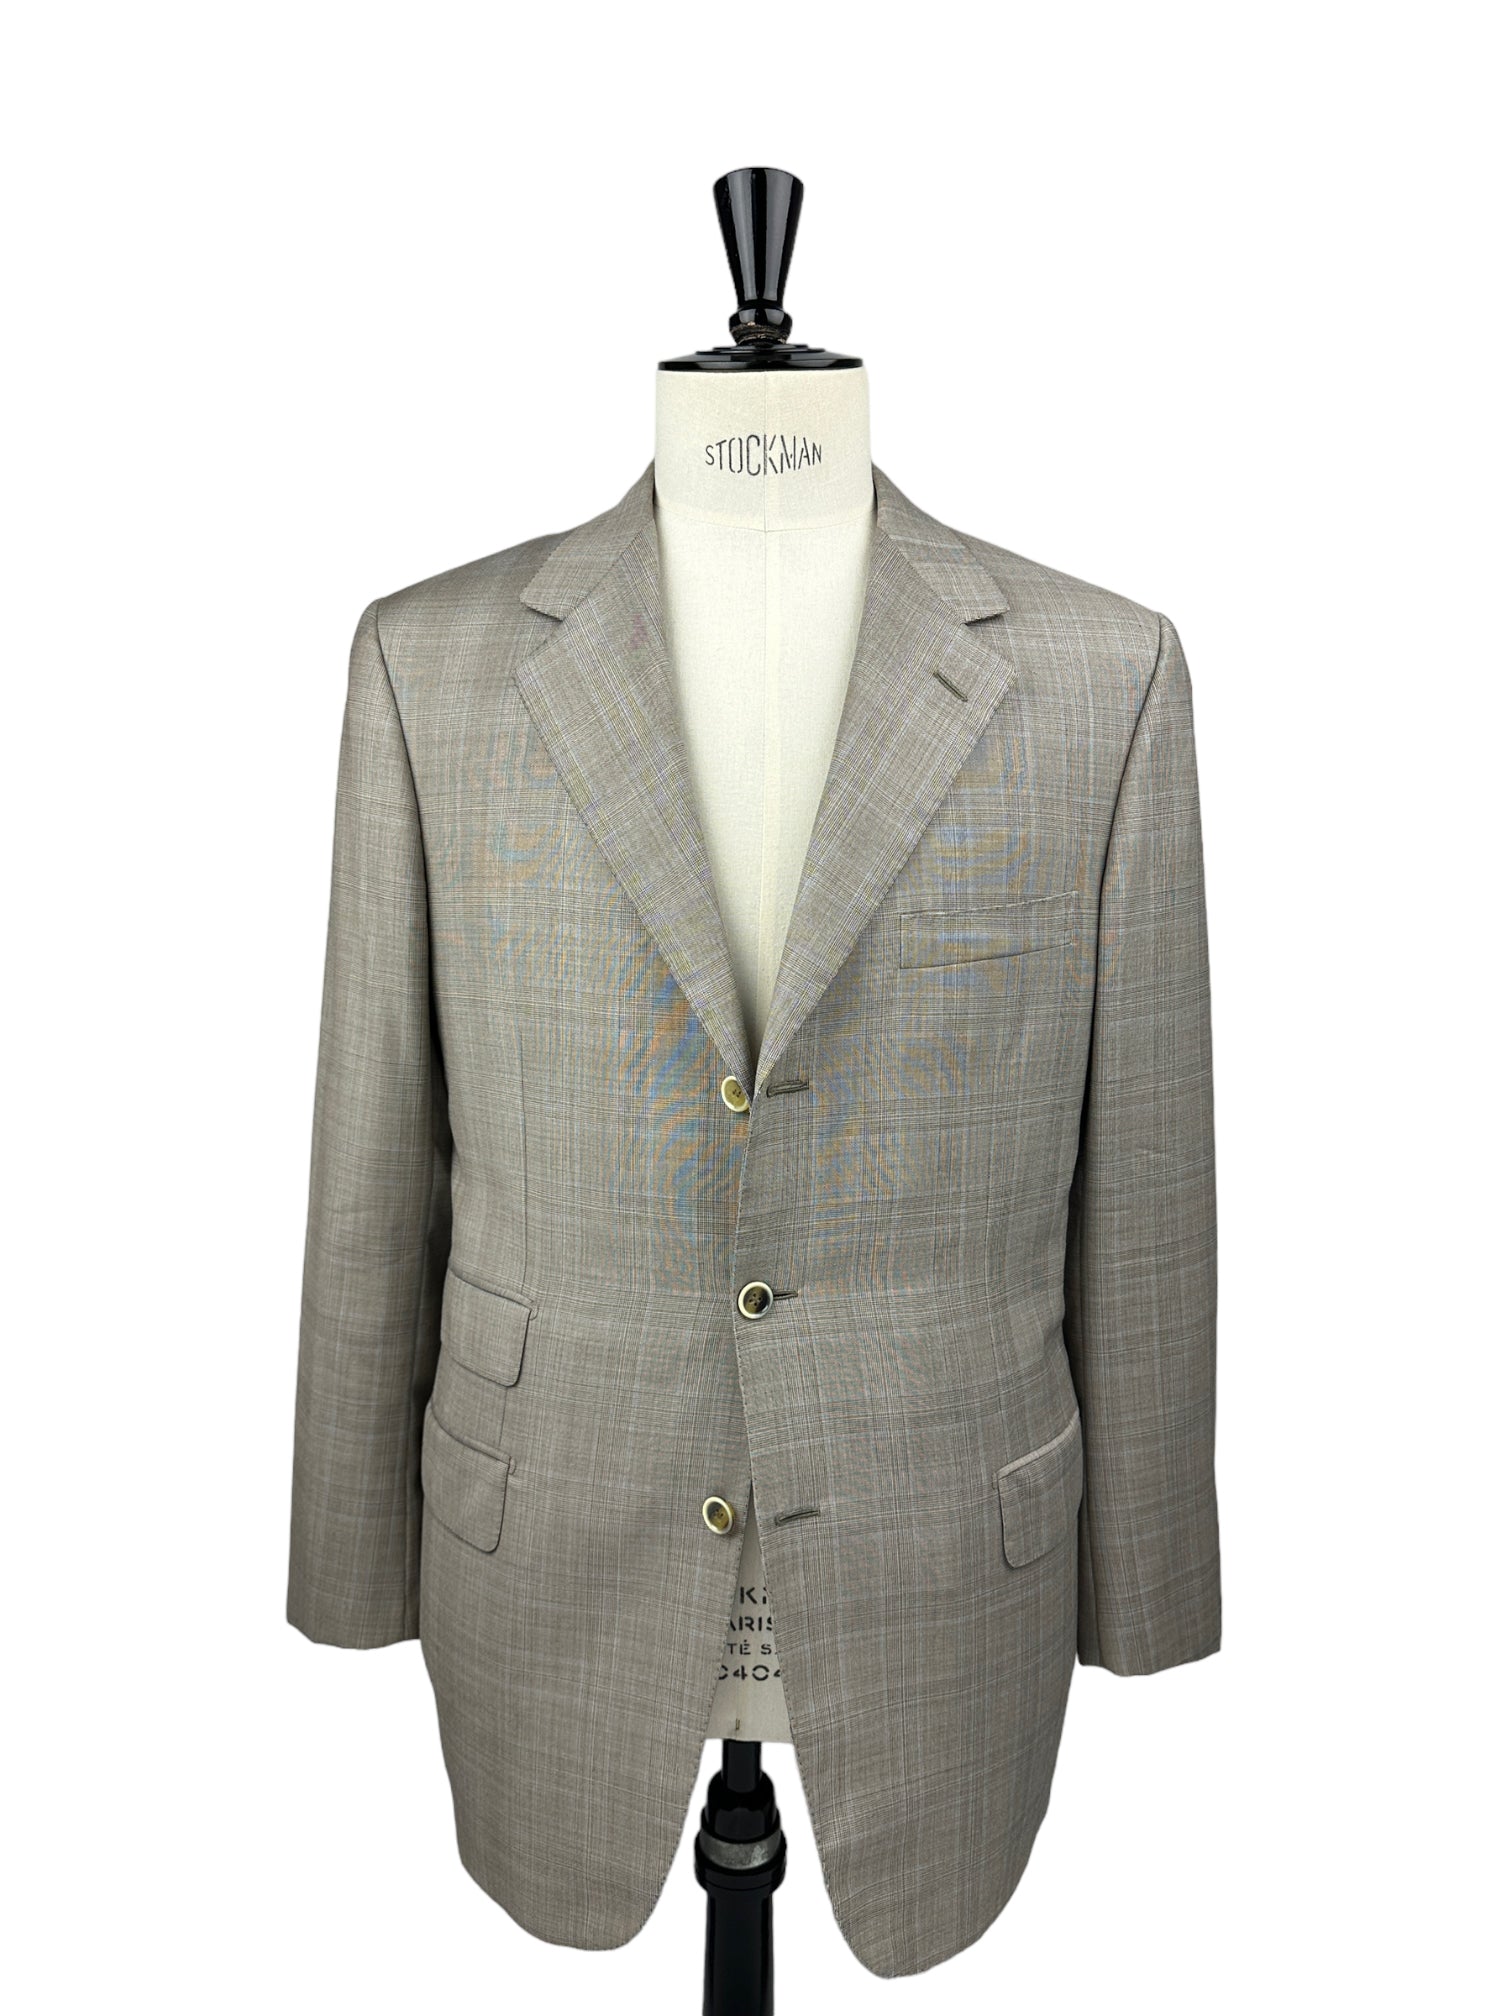 Brioni Light Grey Nomentano Prince of Wales Suit